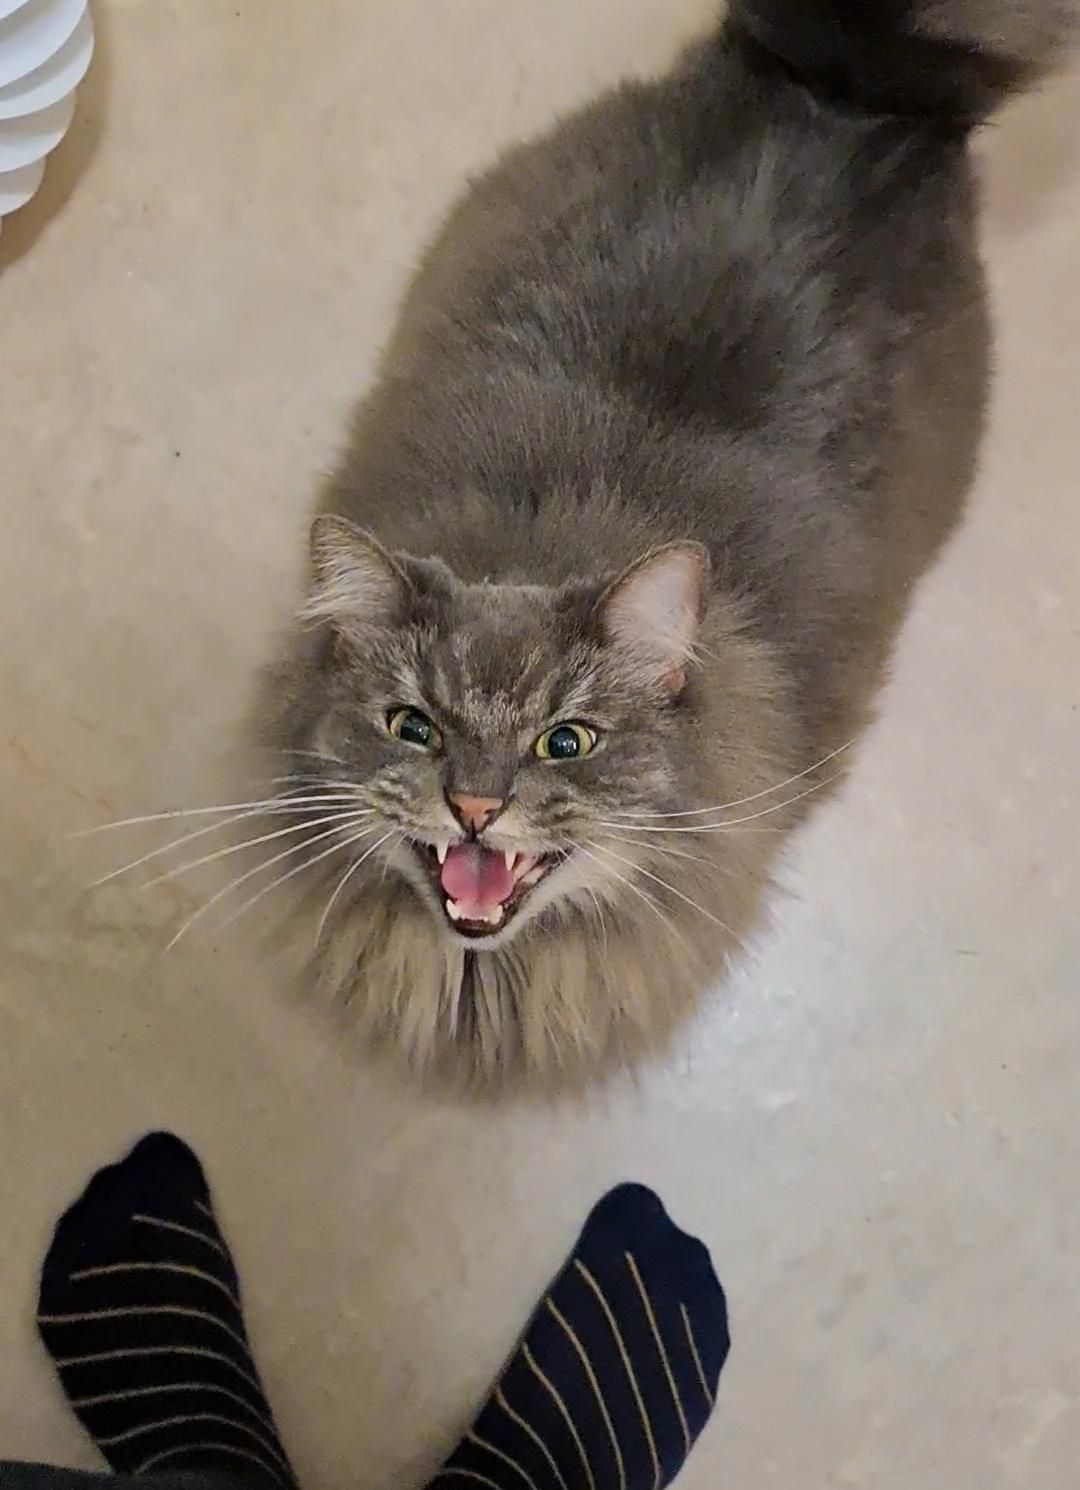 This is what a hangry cat looks like